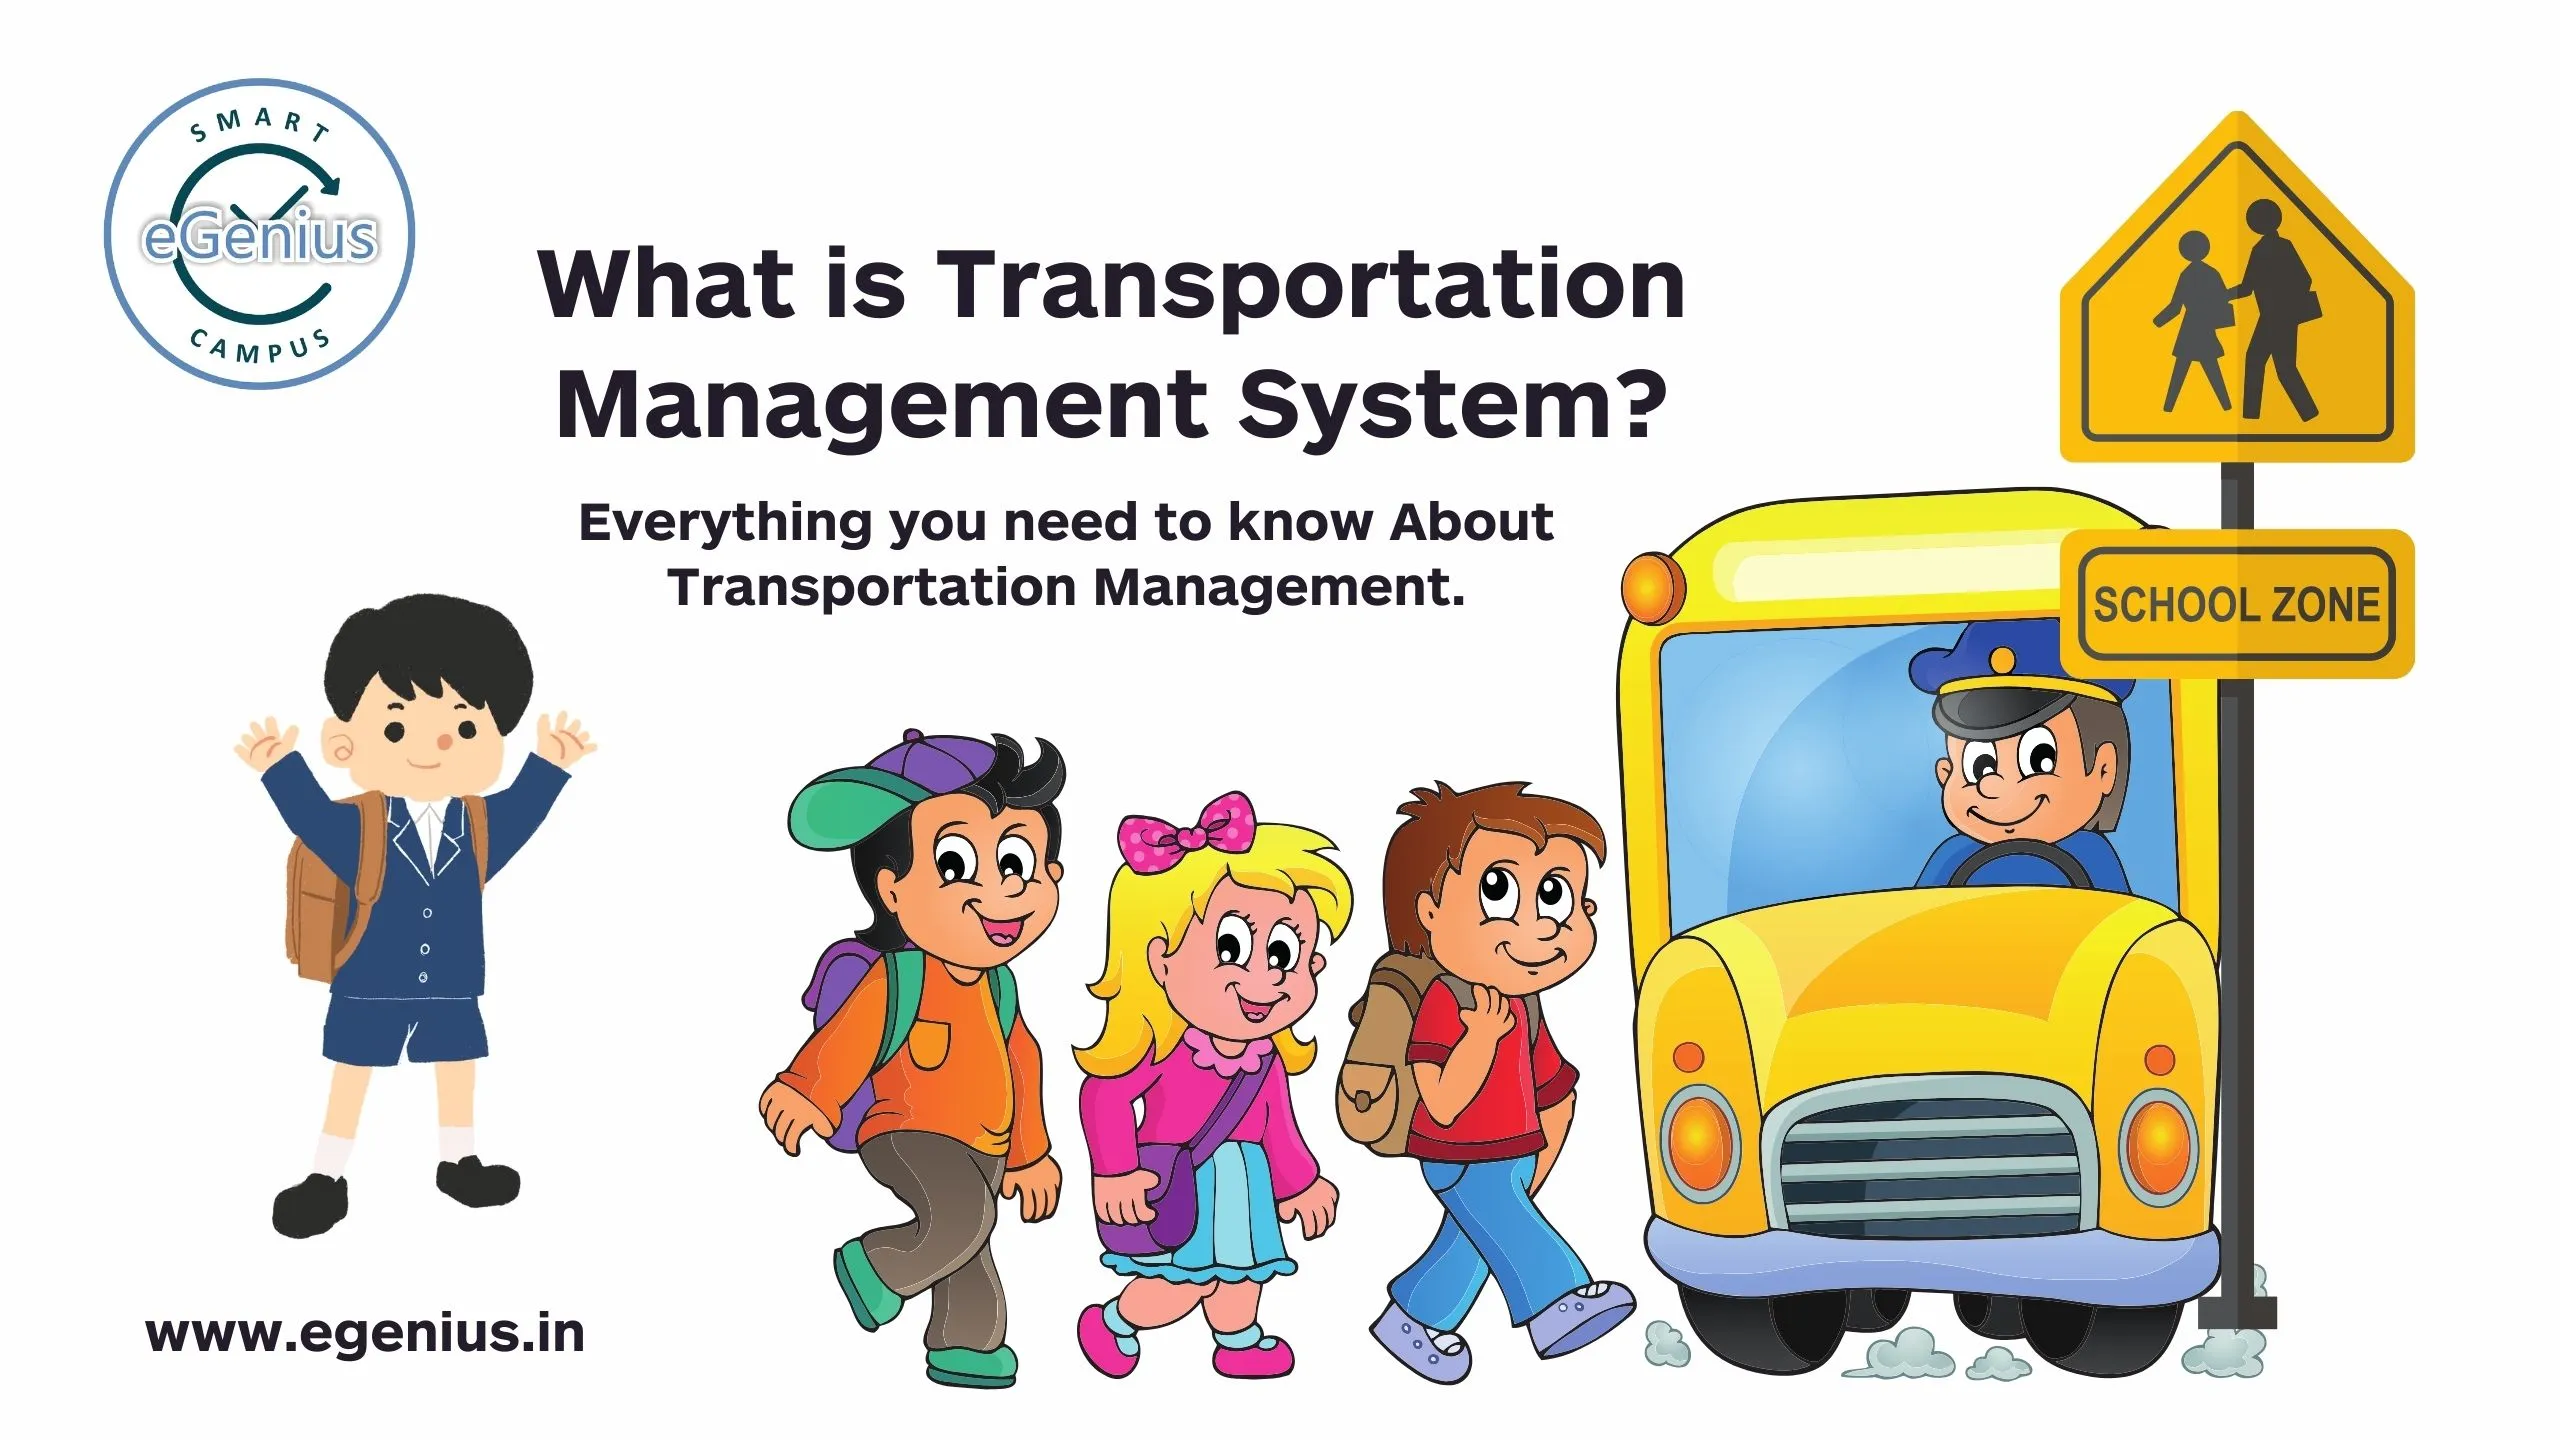 What is Transportation Management System?